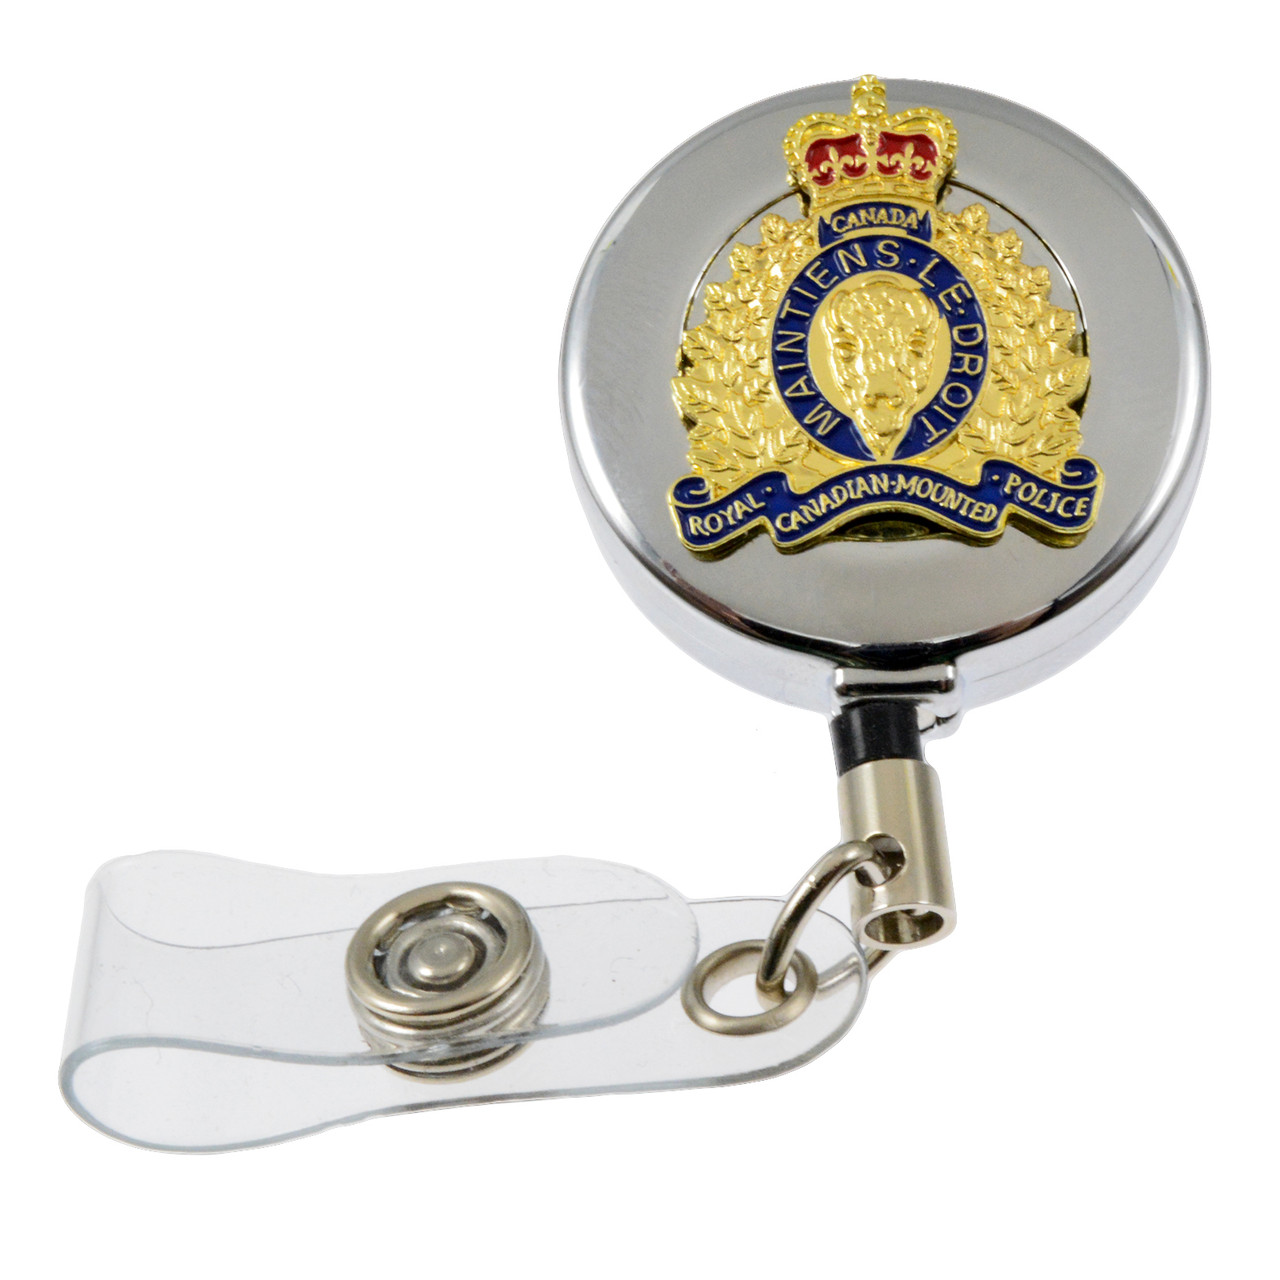 RCMP GRC Royal Canadian Mounted Police Crest Retractable Badge Reel